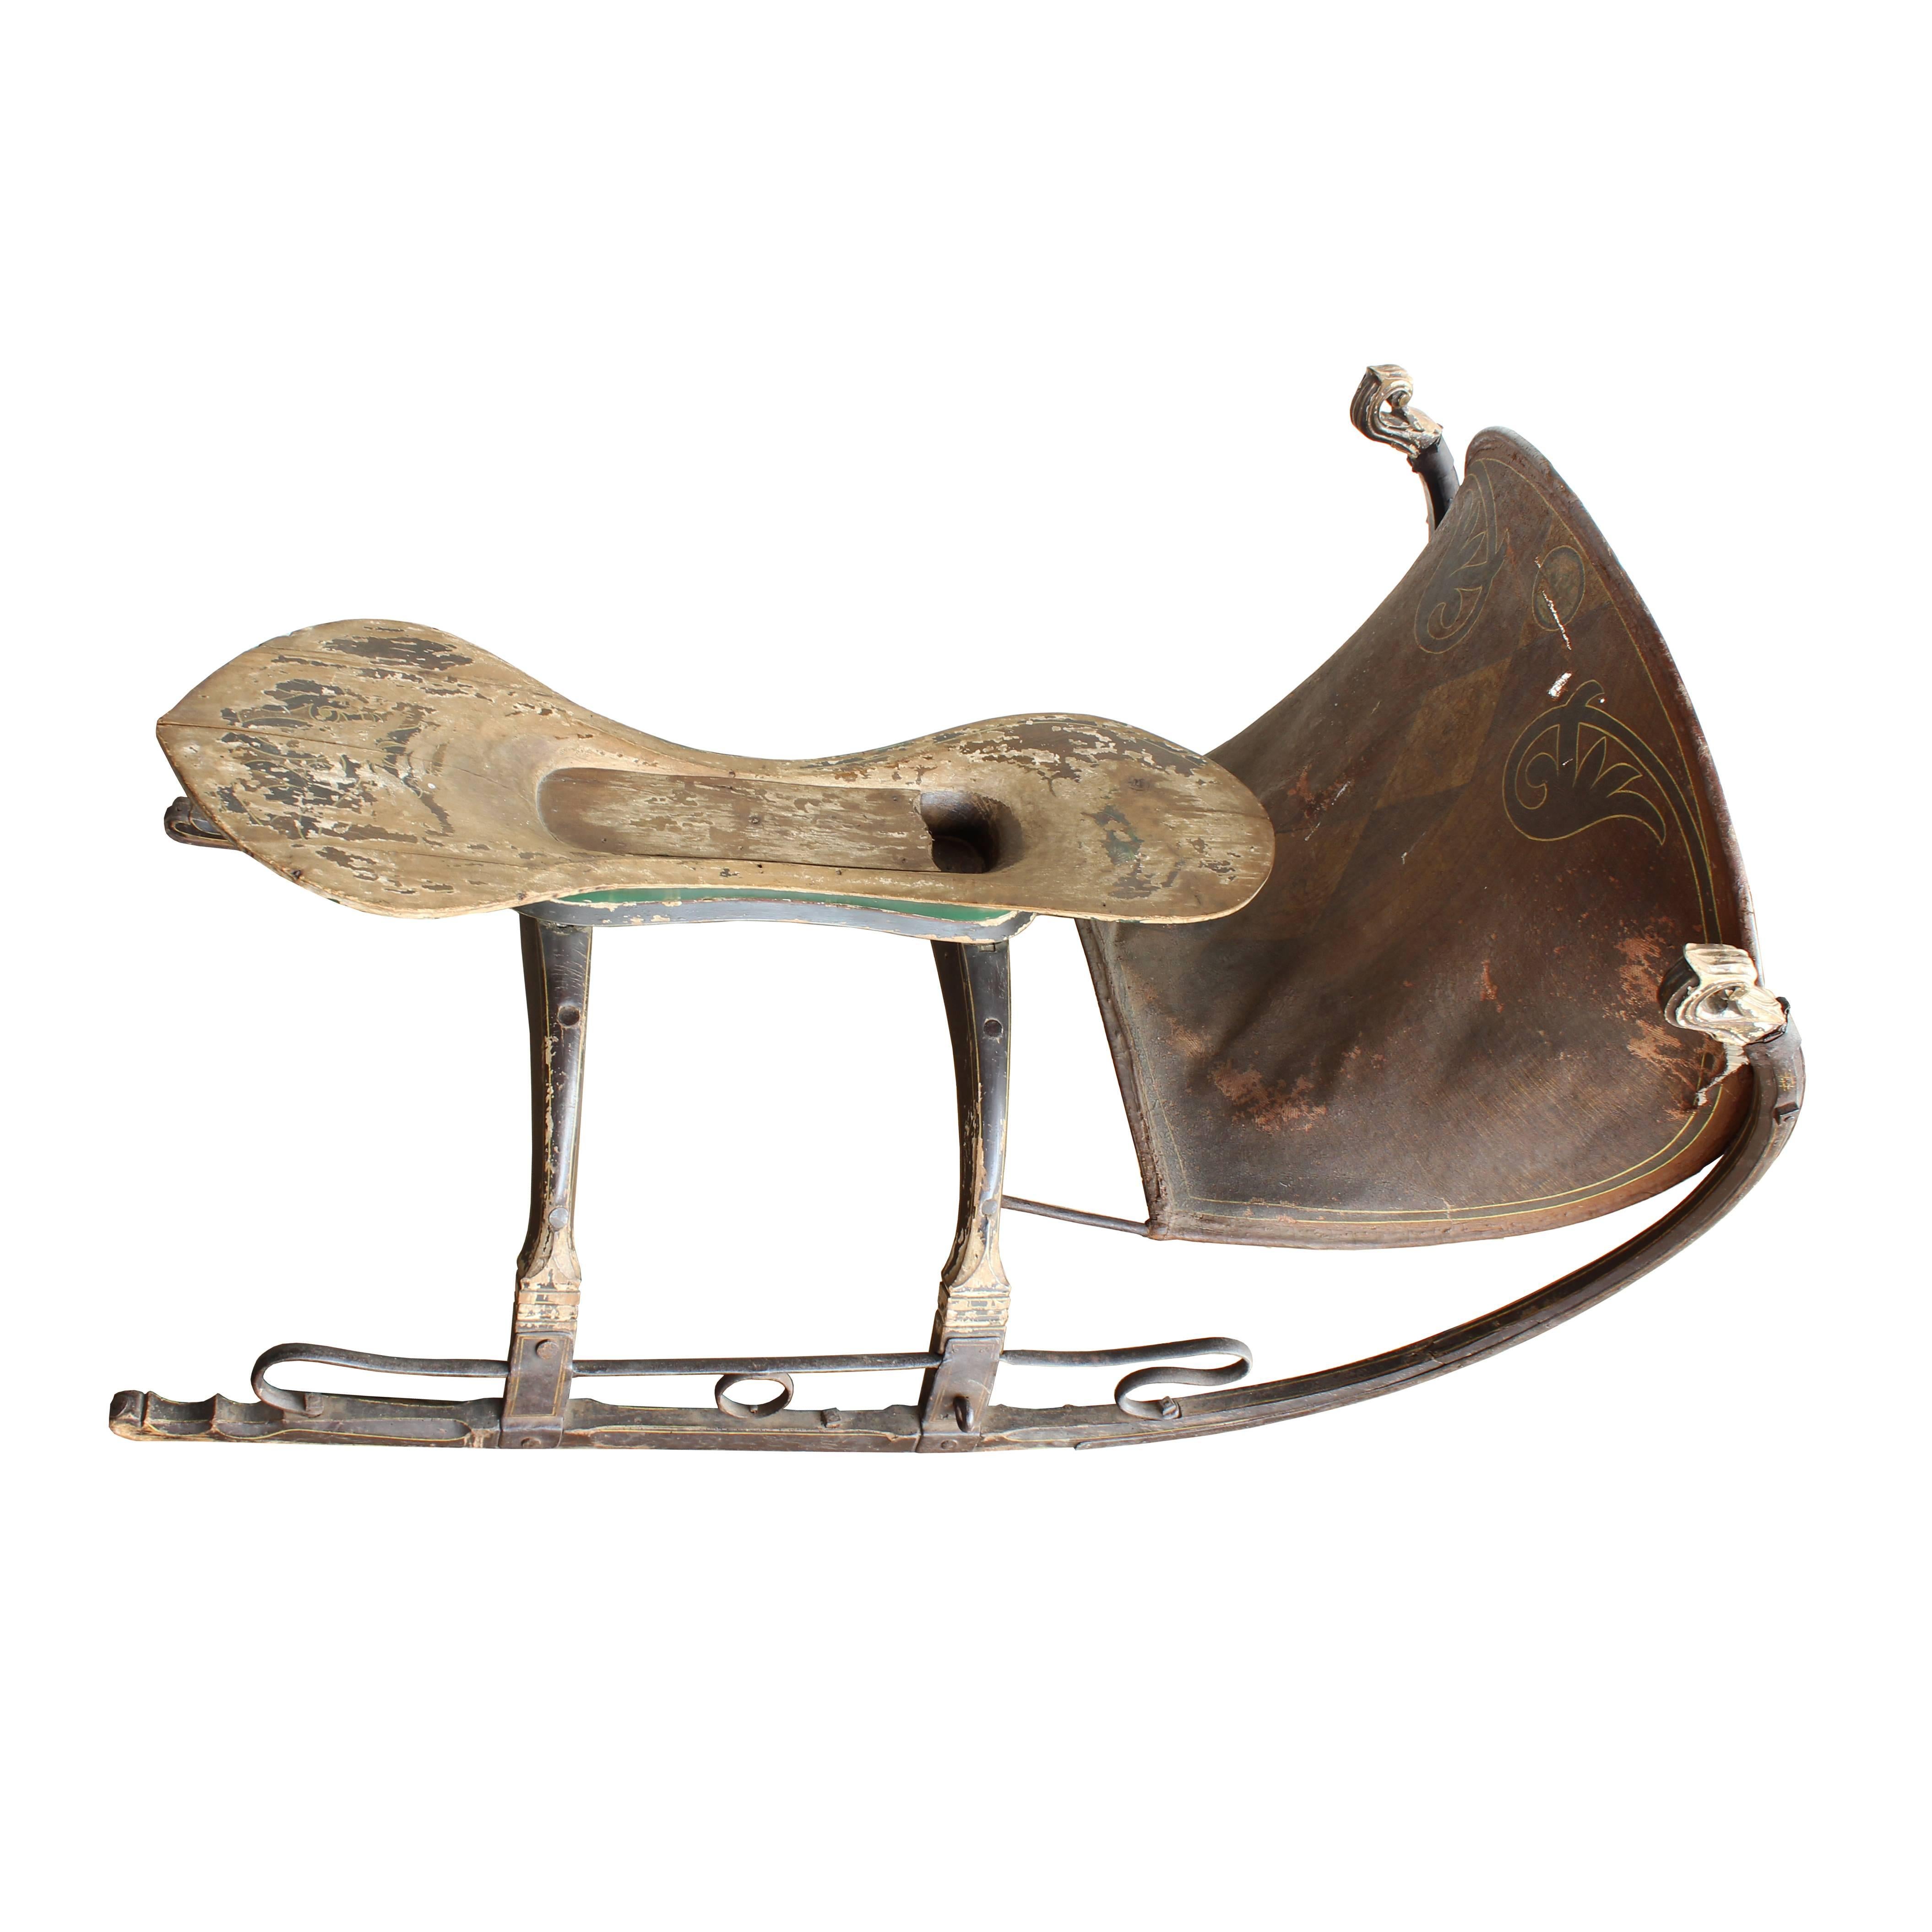 The elegant design of this unusual small sleigh features wooden rails with hand-carved accents, hand-wrought iron and a canvas shield with a painted faux bois inlay design. The sleigh may have been built for racing.